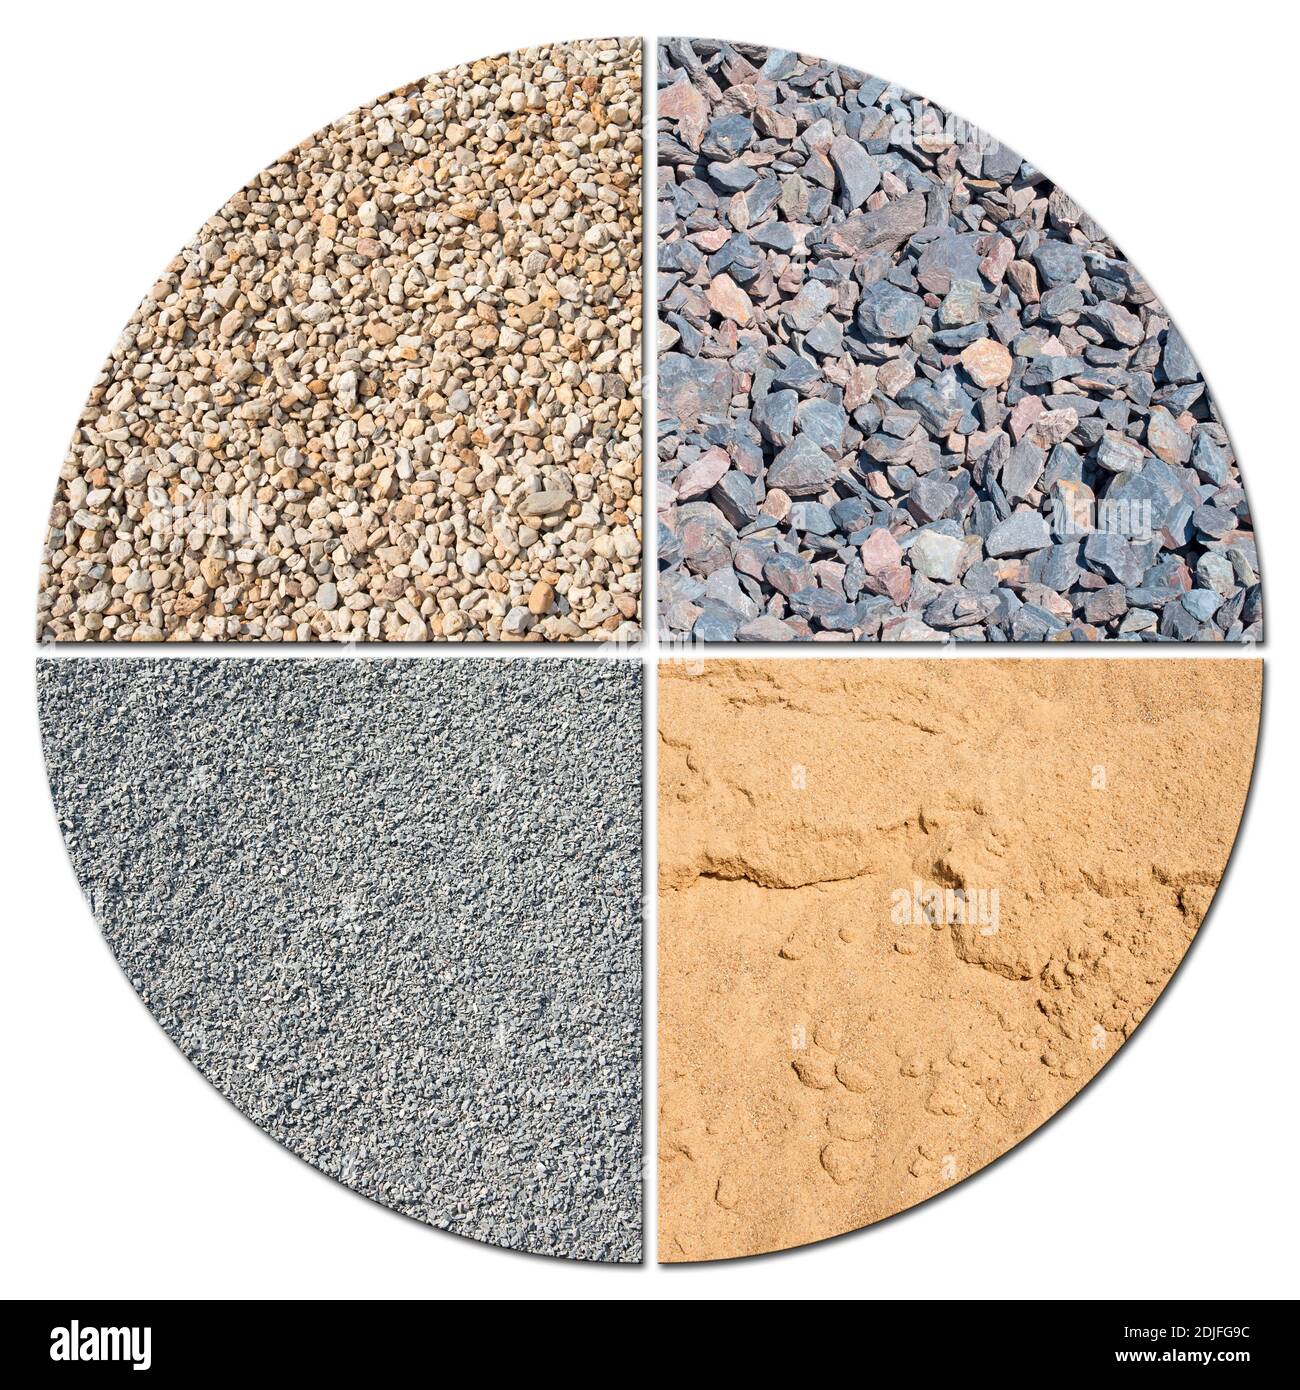 Different building materials in a collage Stock Photo